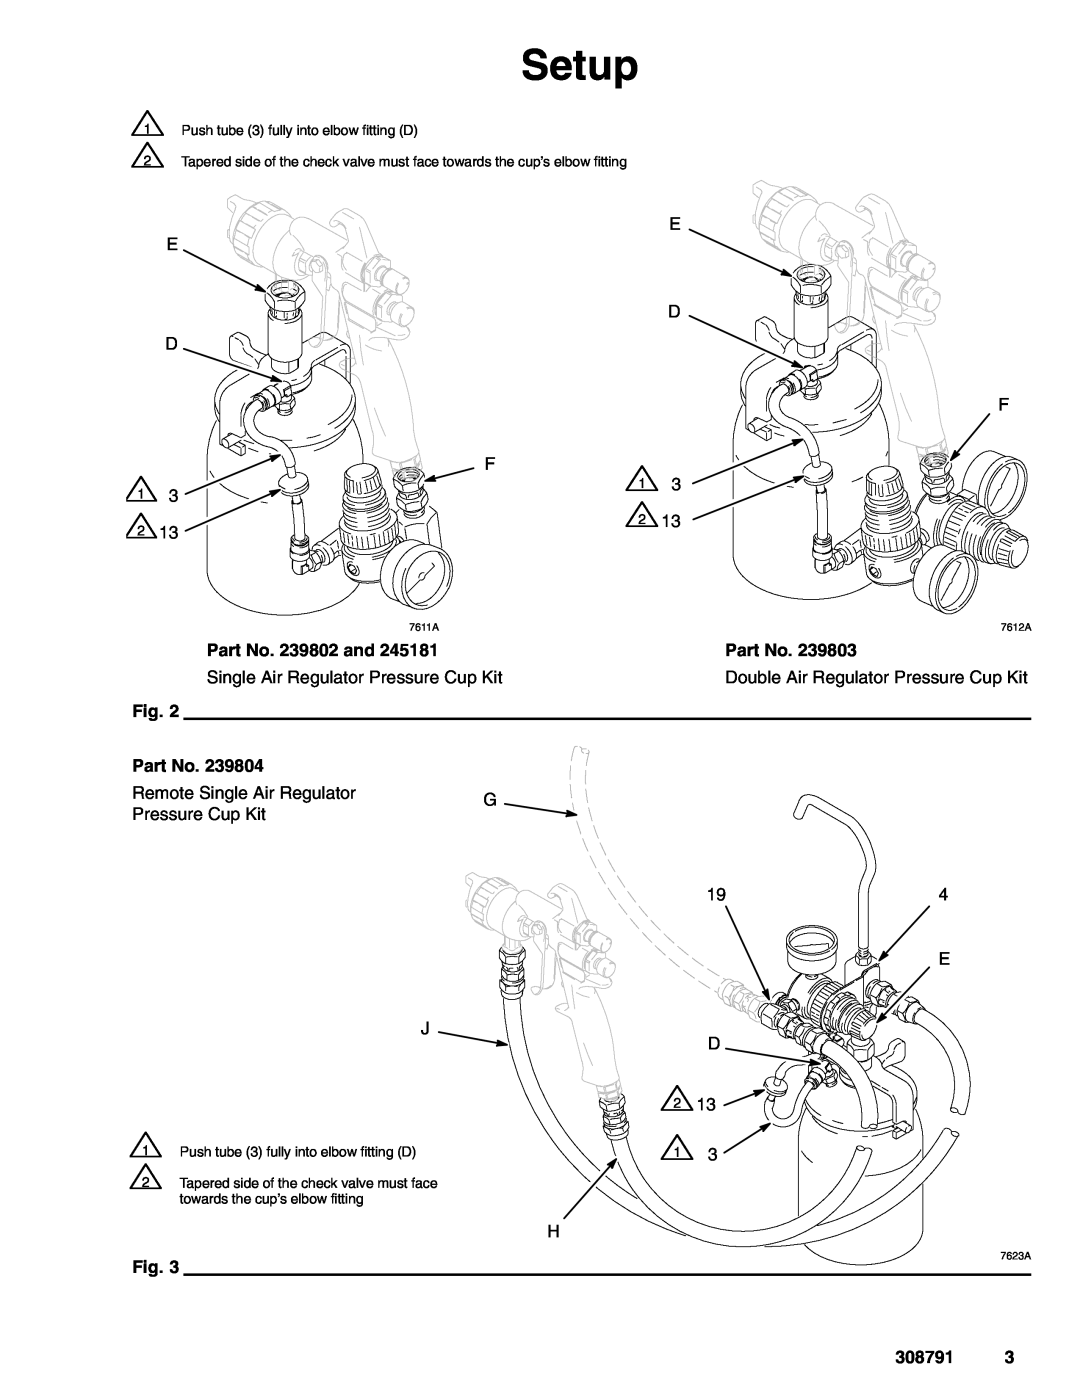 Graco 308791E important safety instructions Setup, Part No. 239802 and, 7611A, 7612A, 7623A 